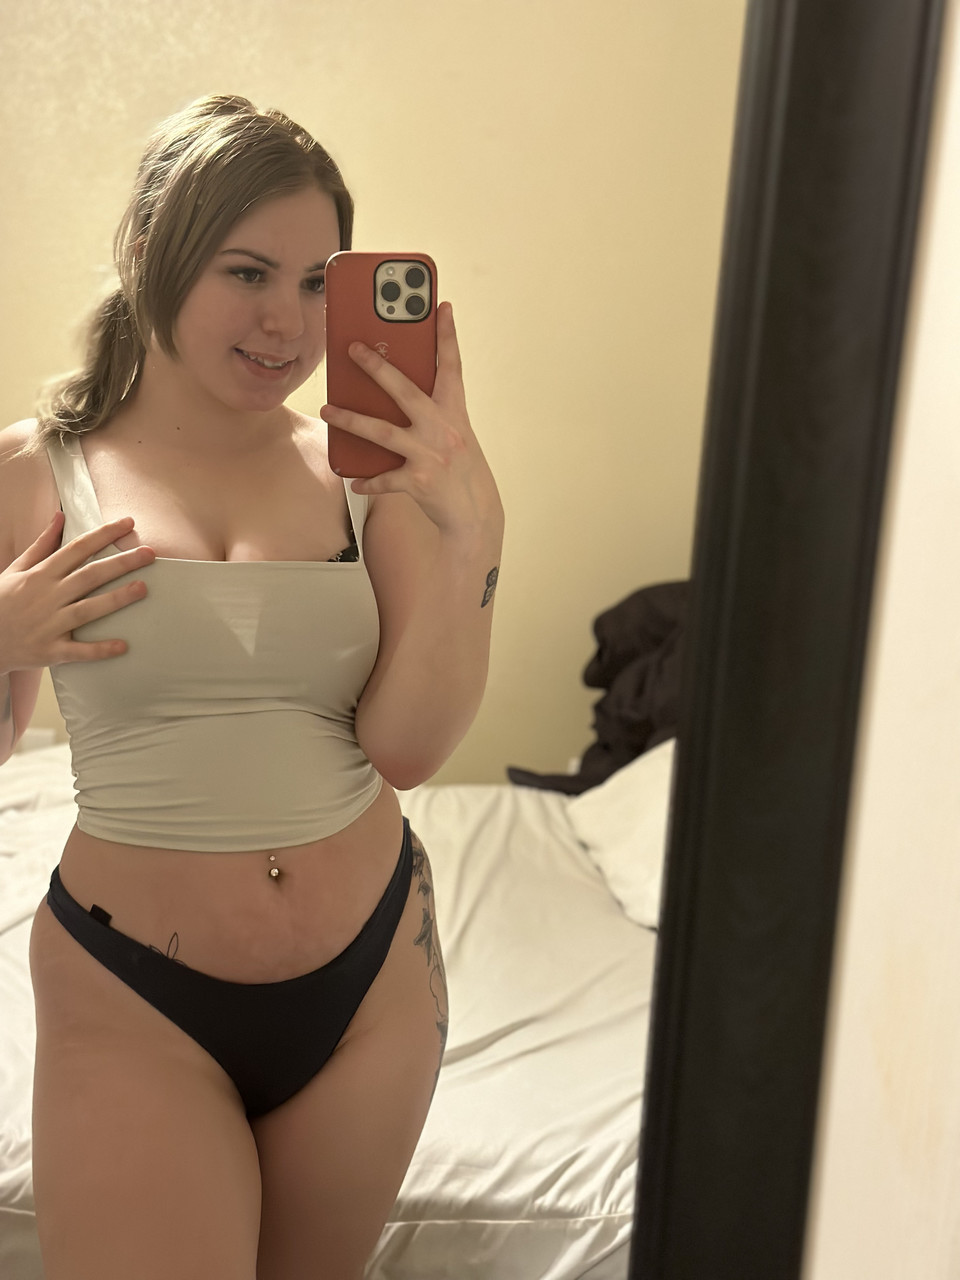 Chubby Onlyfans Cam Babe Flaunts Her Juicy Tits While Taking Selfies